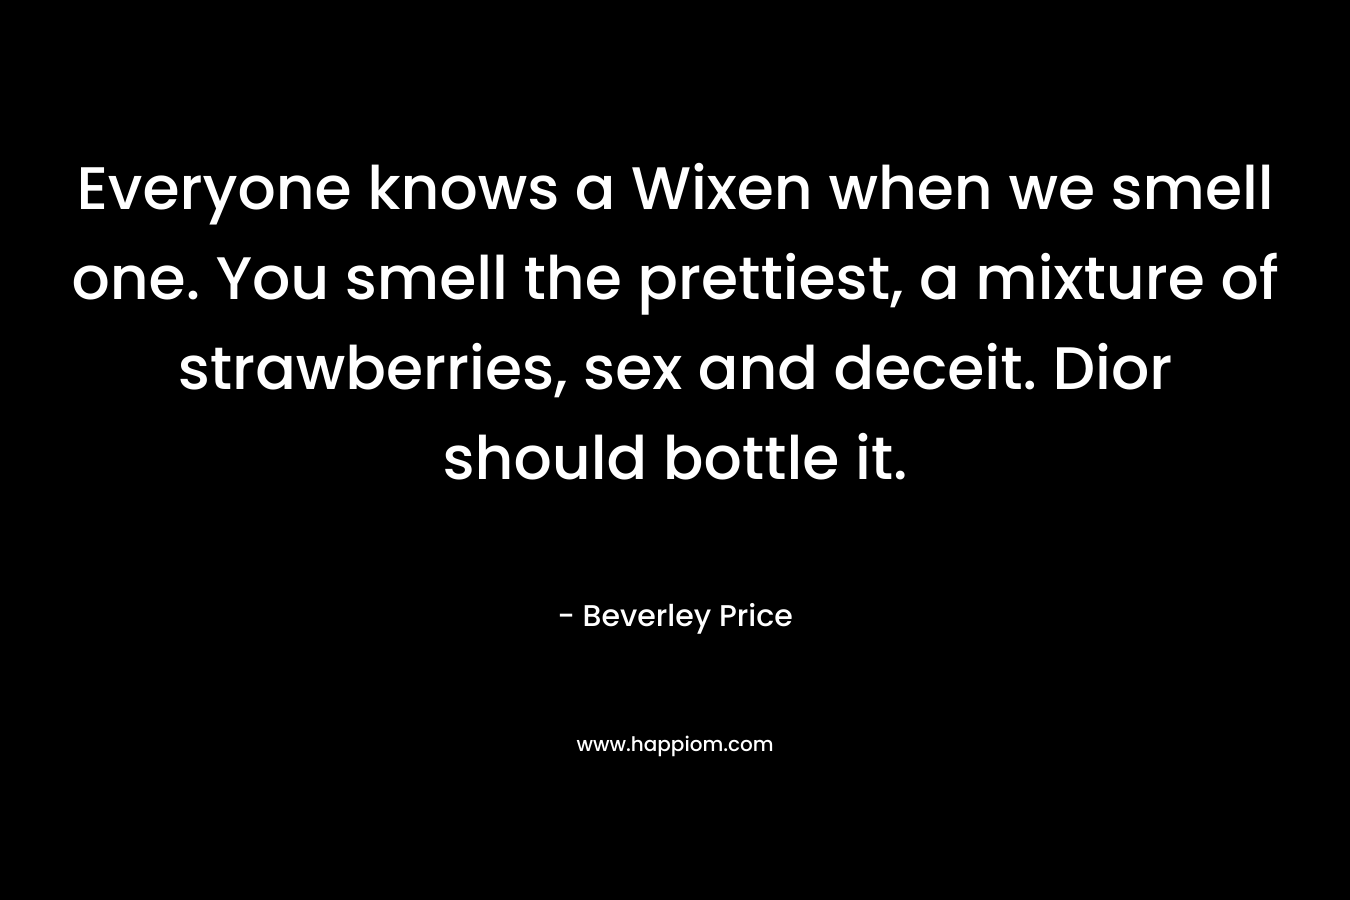 Everyone knows a Wixen when we smell one. You smell the prettiest, a mixture of strawberries, sex and deceit. Dior should bottle it.